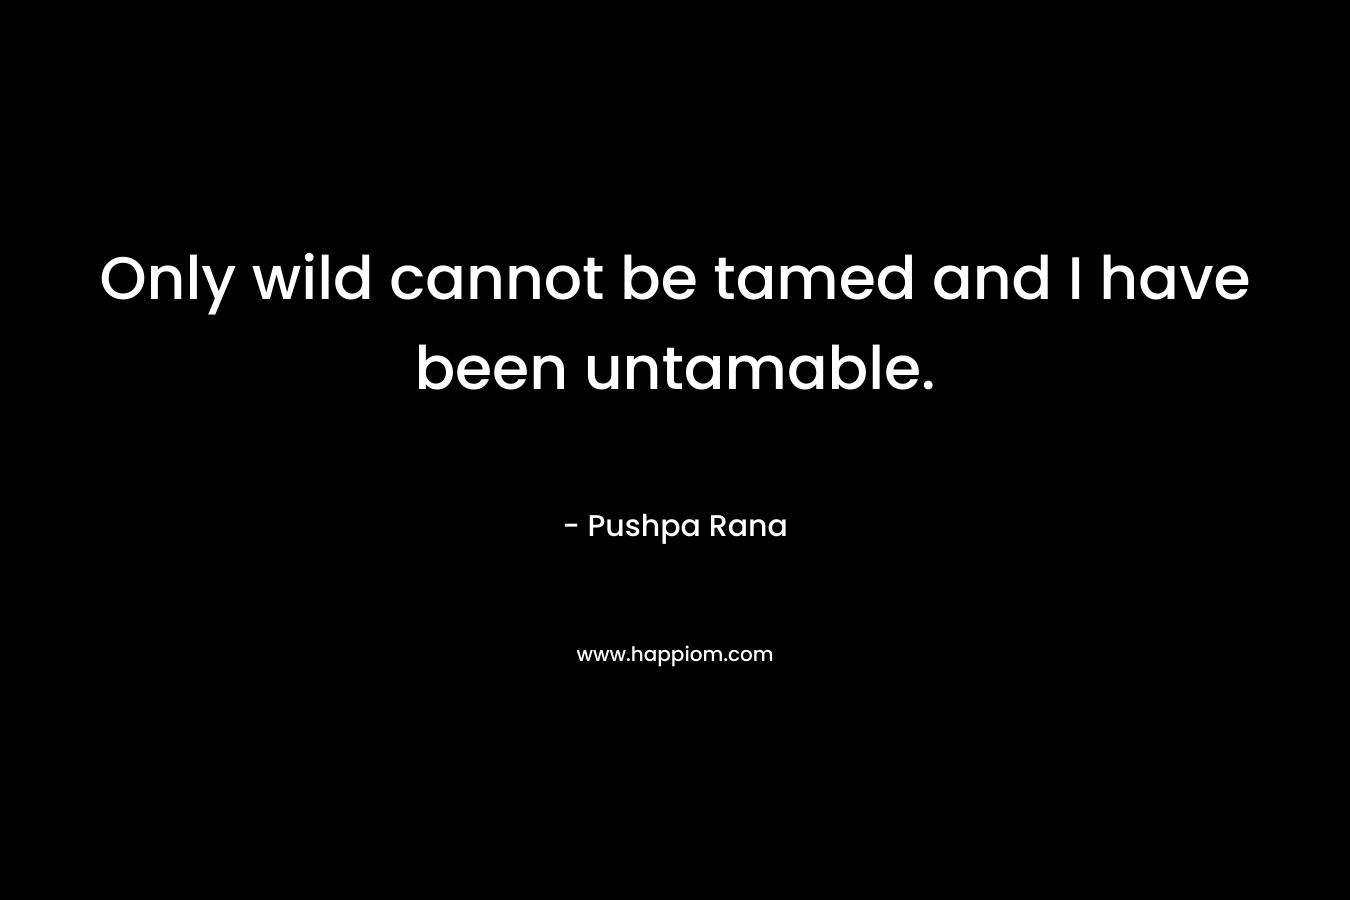 Only wild cannot be tamed and I have been untamable.